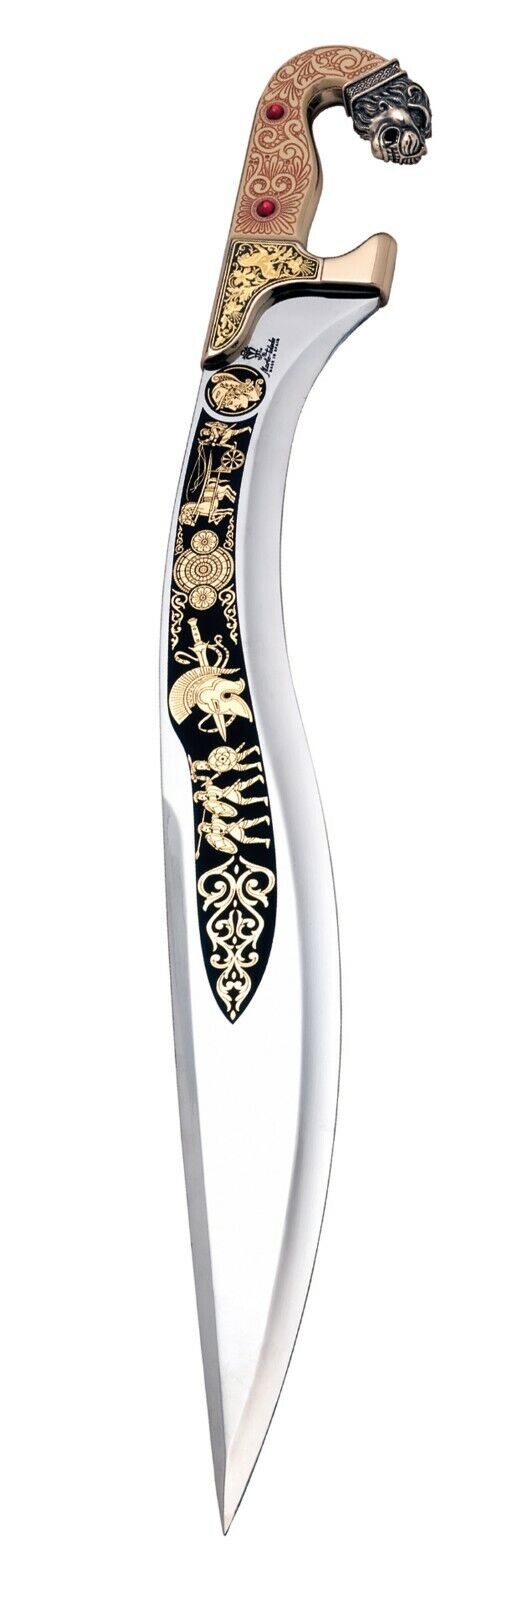 Marto - Alexander The Great Sword, Heroes and Civilization Collection, 71 cm/28 